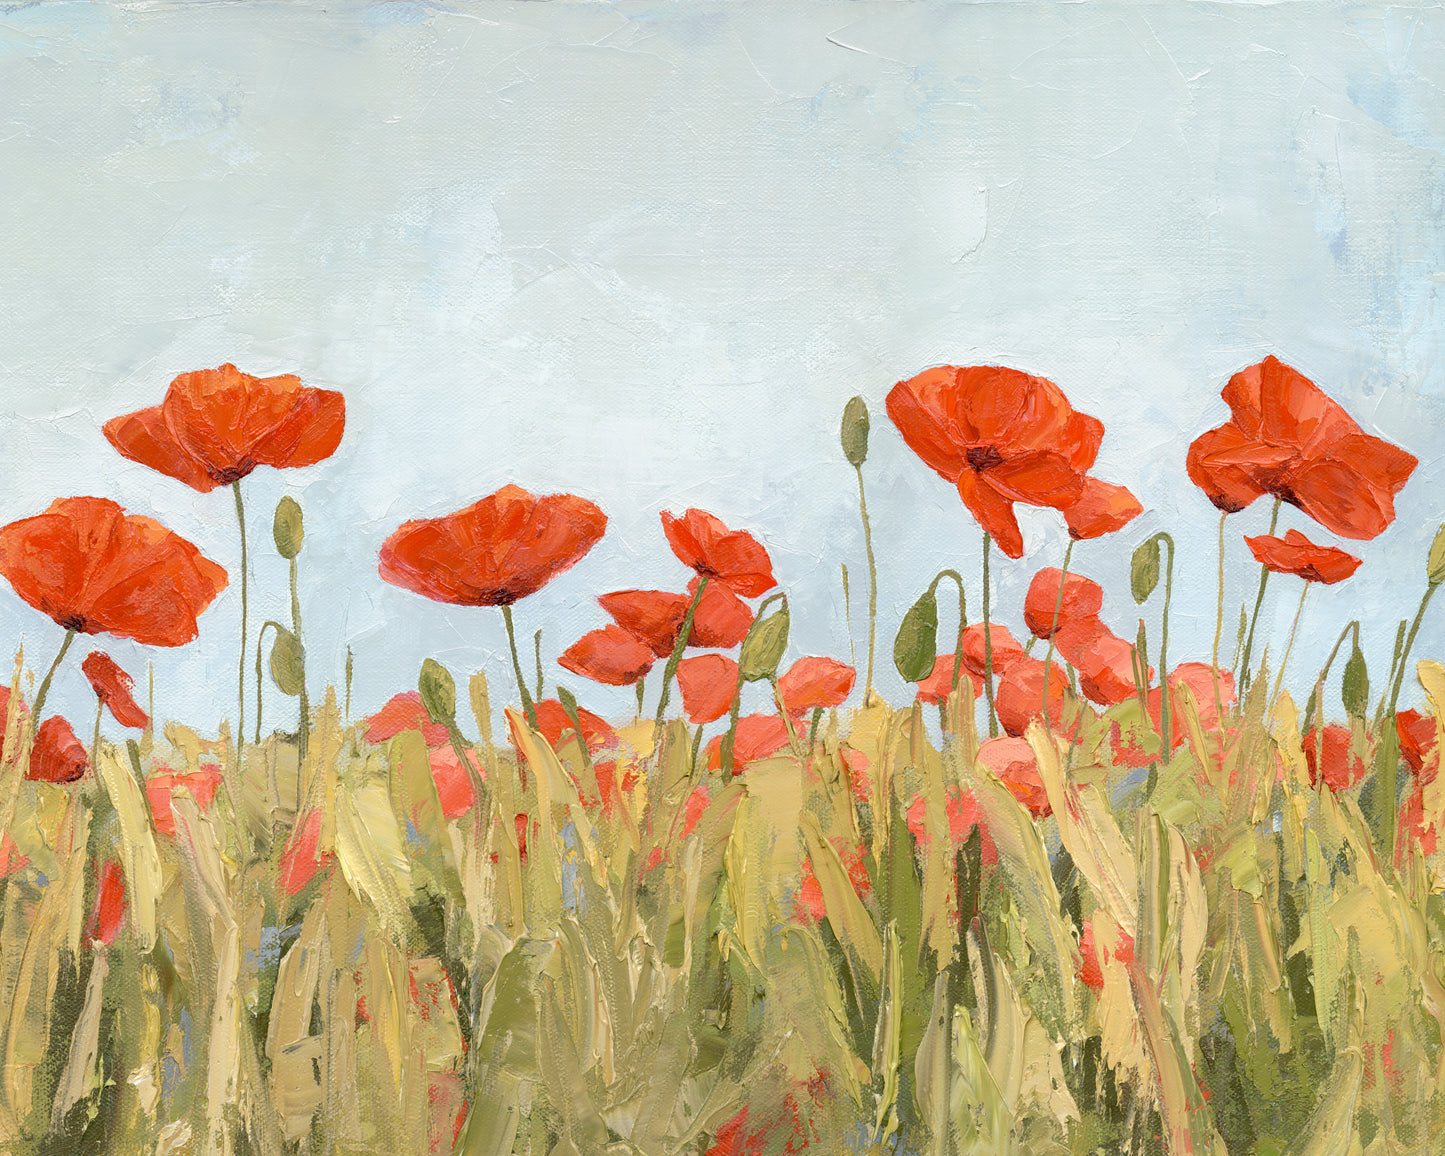 Poppies Moving With Life Print